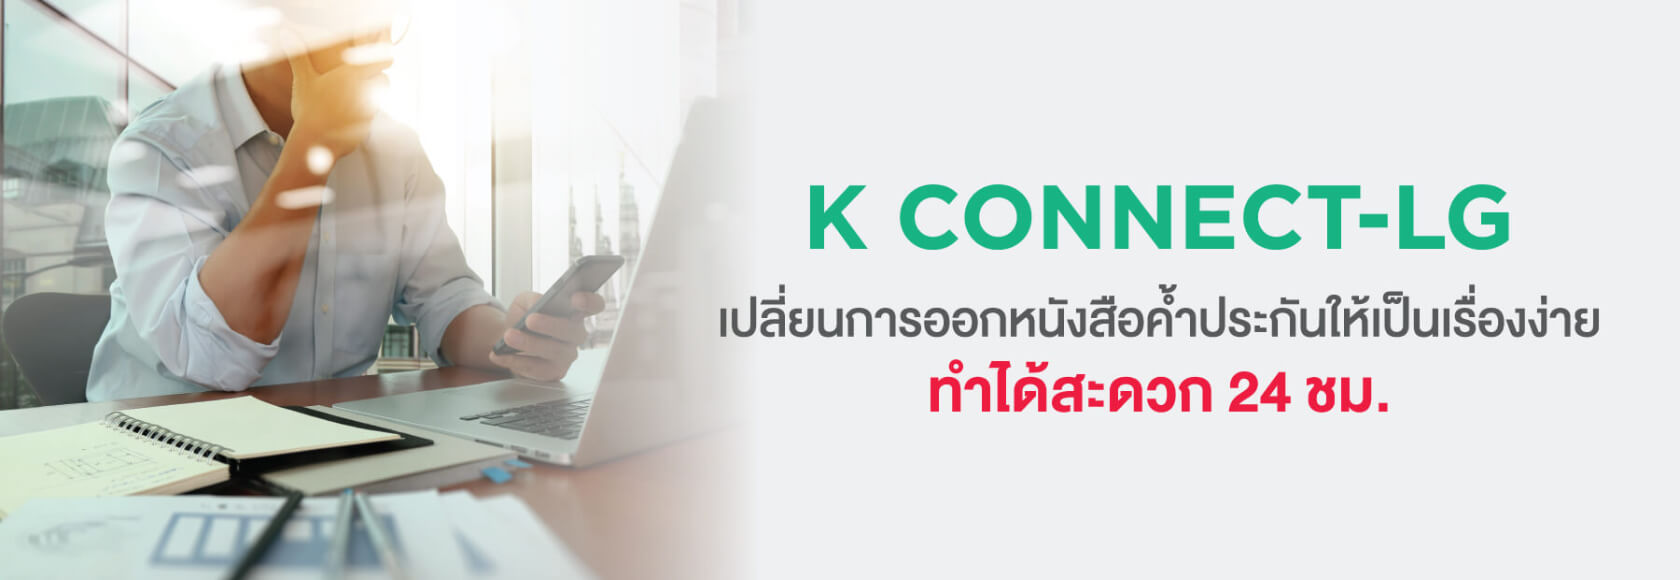 K CONNECT-LG